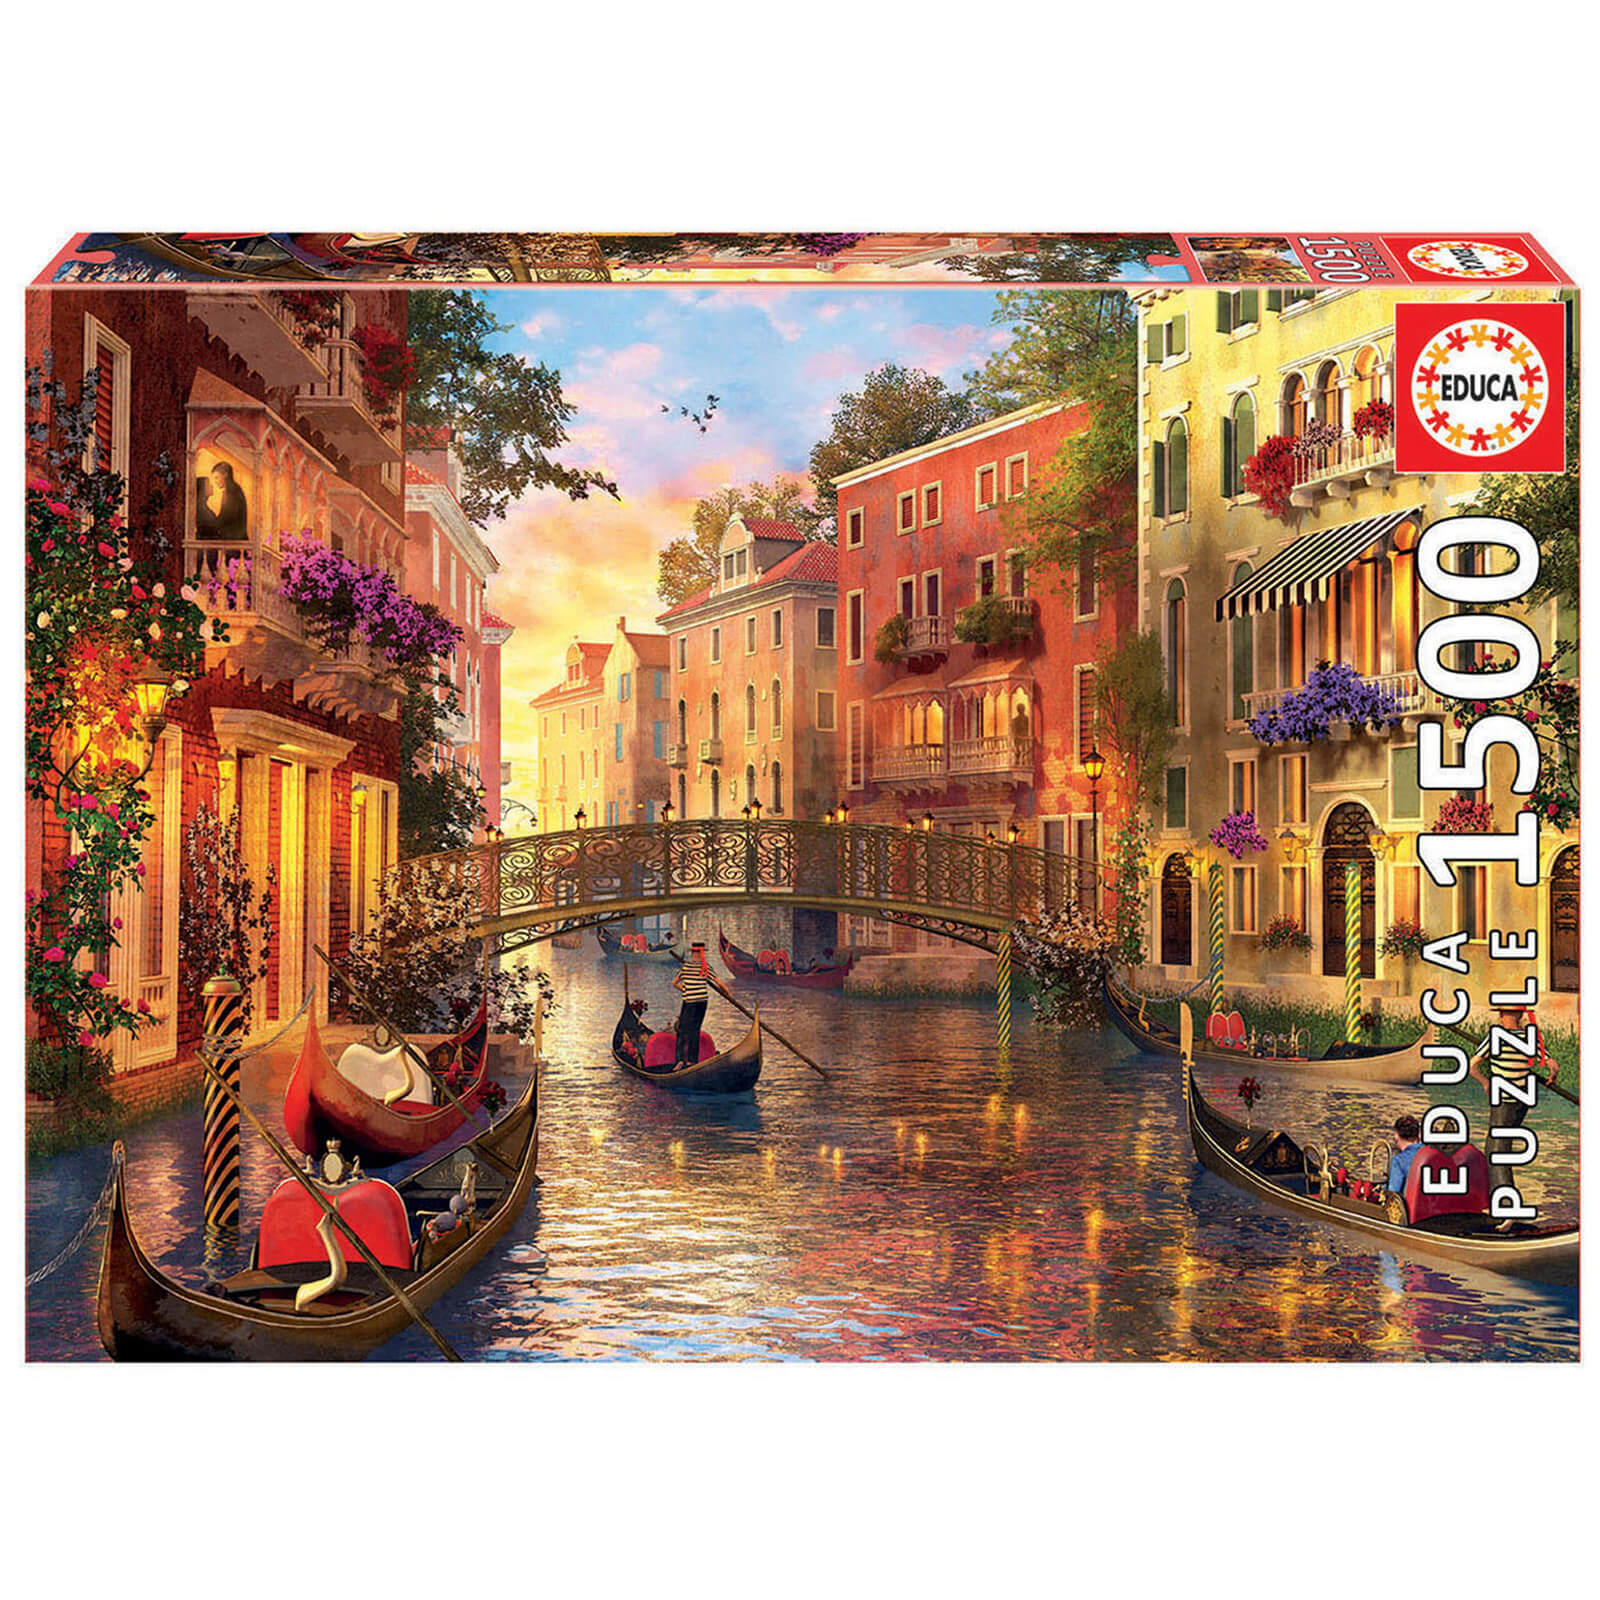 Sunset In Venice Jigsaw Puzzle (1500 Pieces)